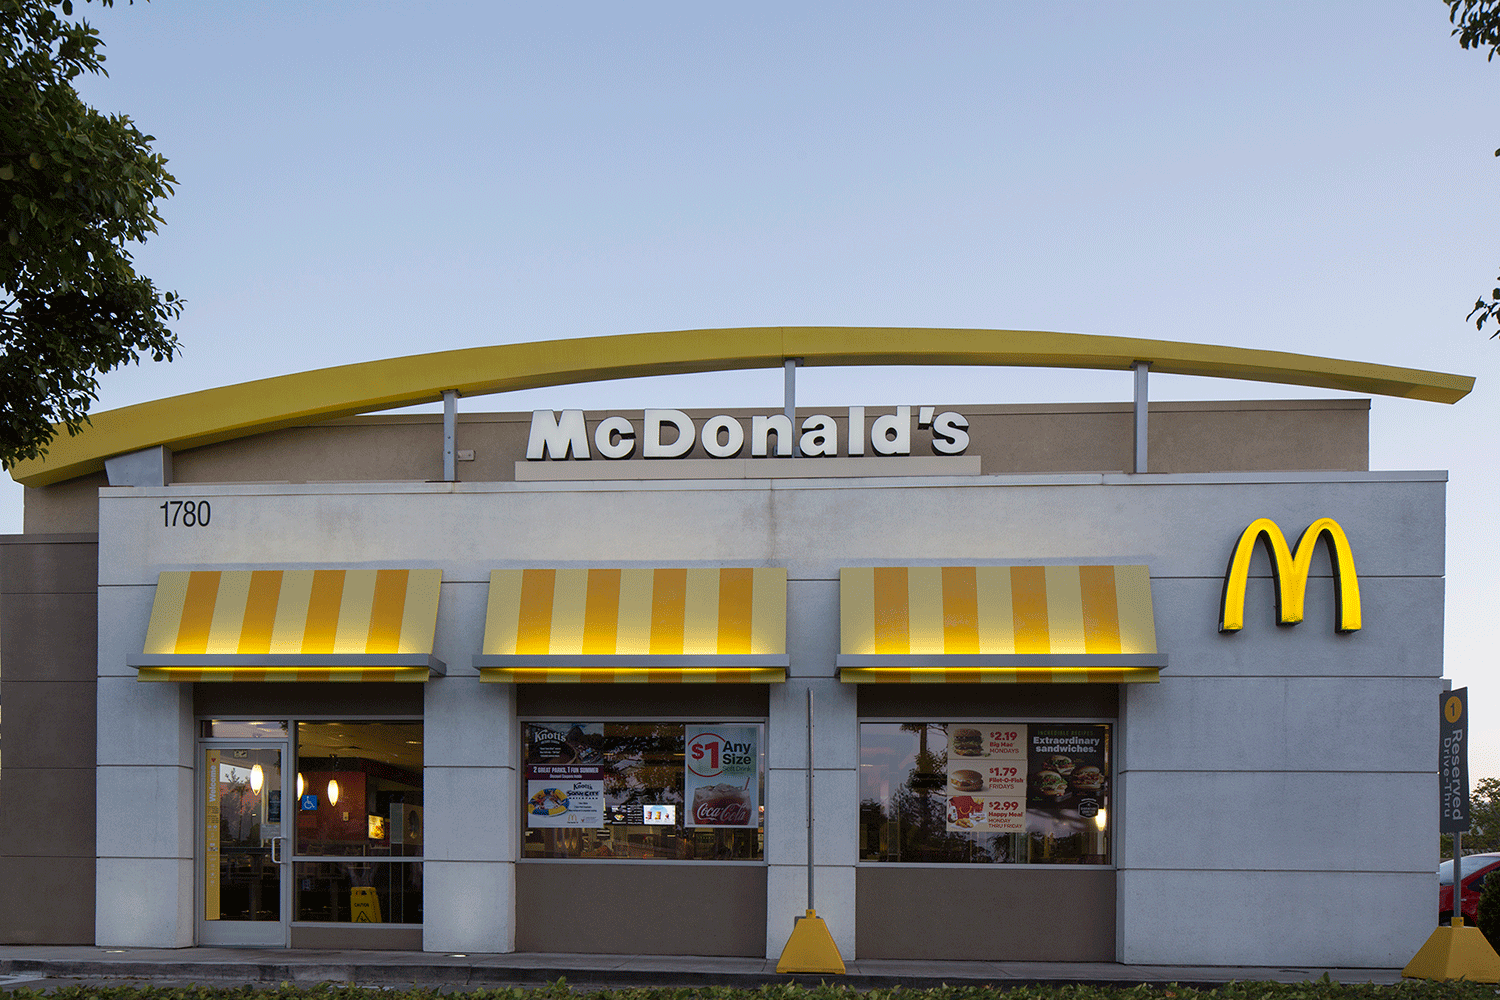  Exterior view of McDonald's at dusk in Venture Park